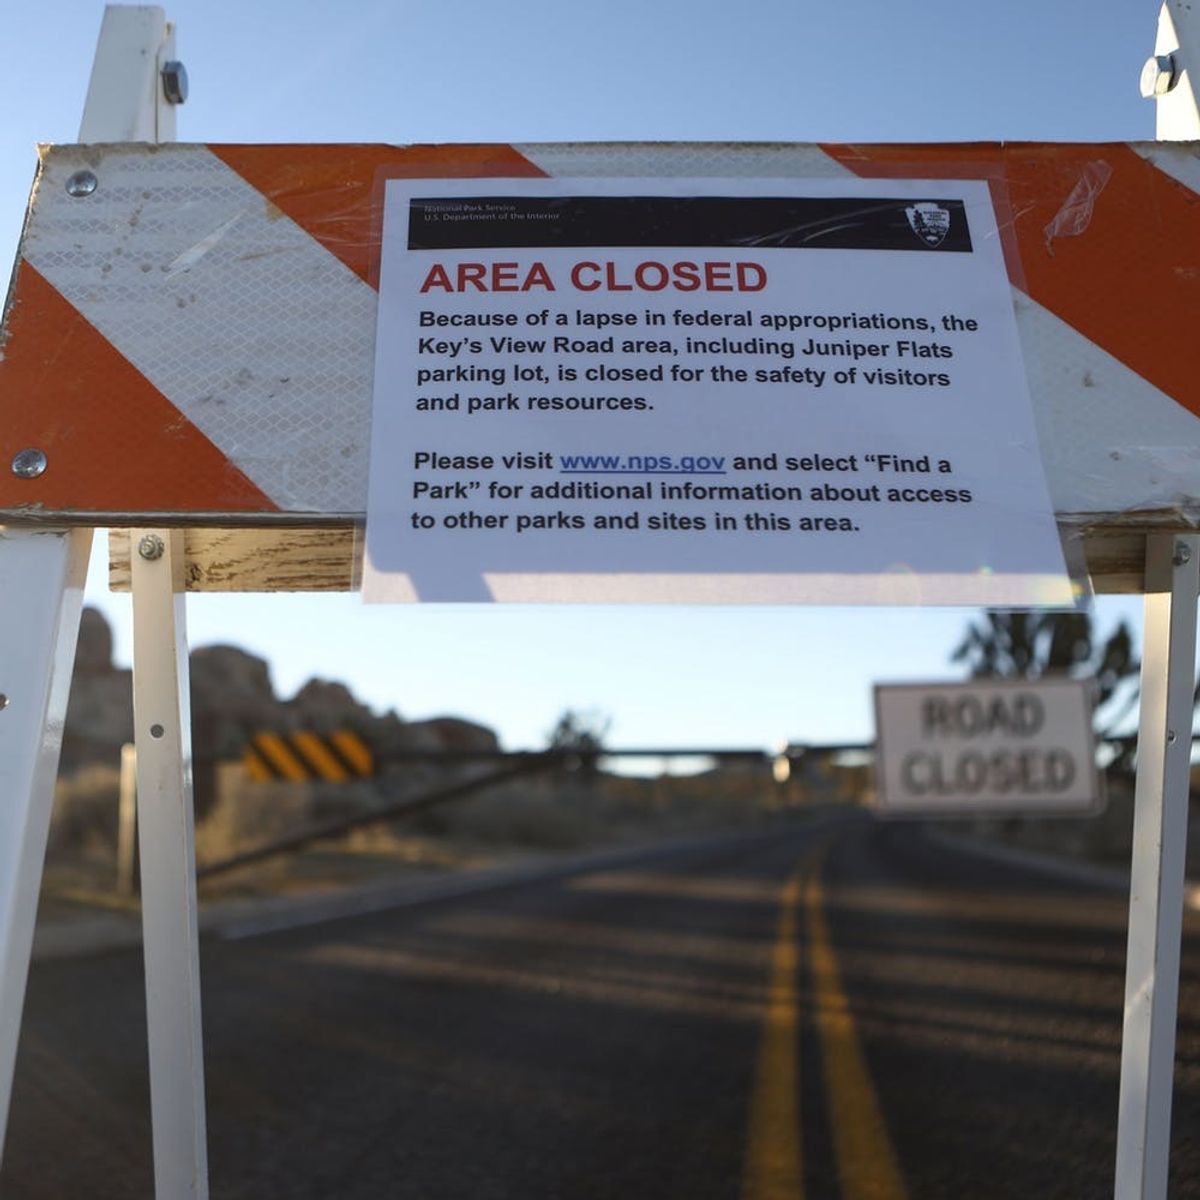 Though the Government Is Temporarily Re-Opened, the Shutdown Aftermath Has Only Begun